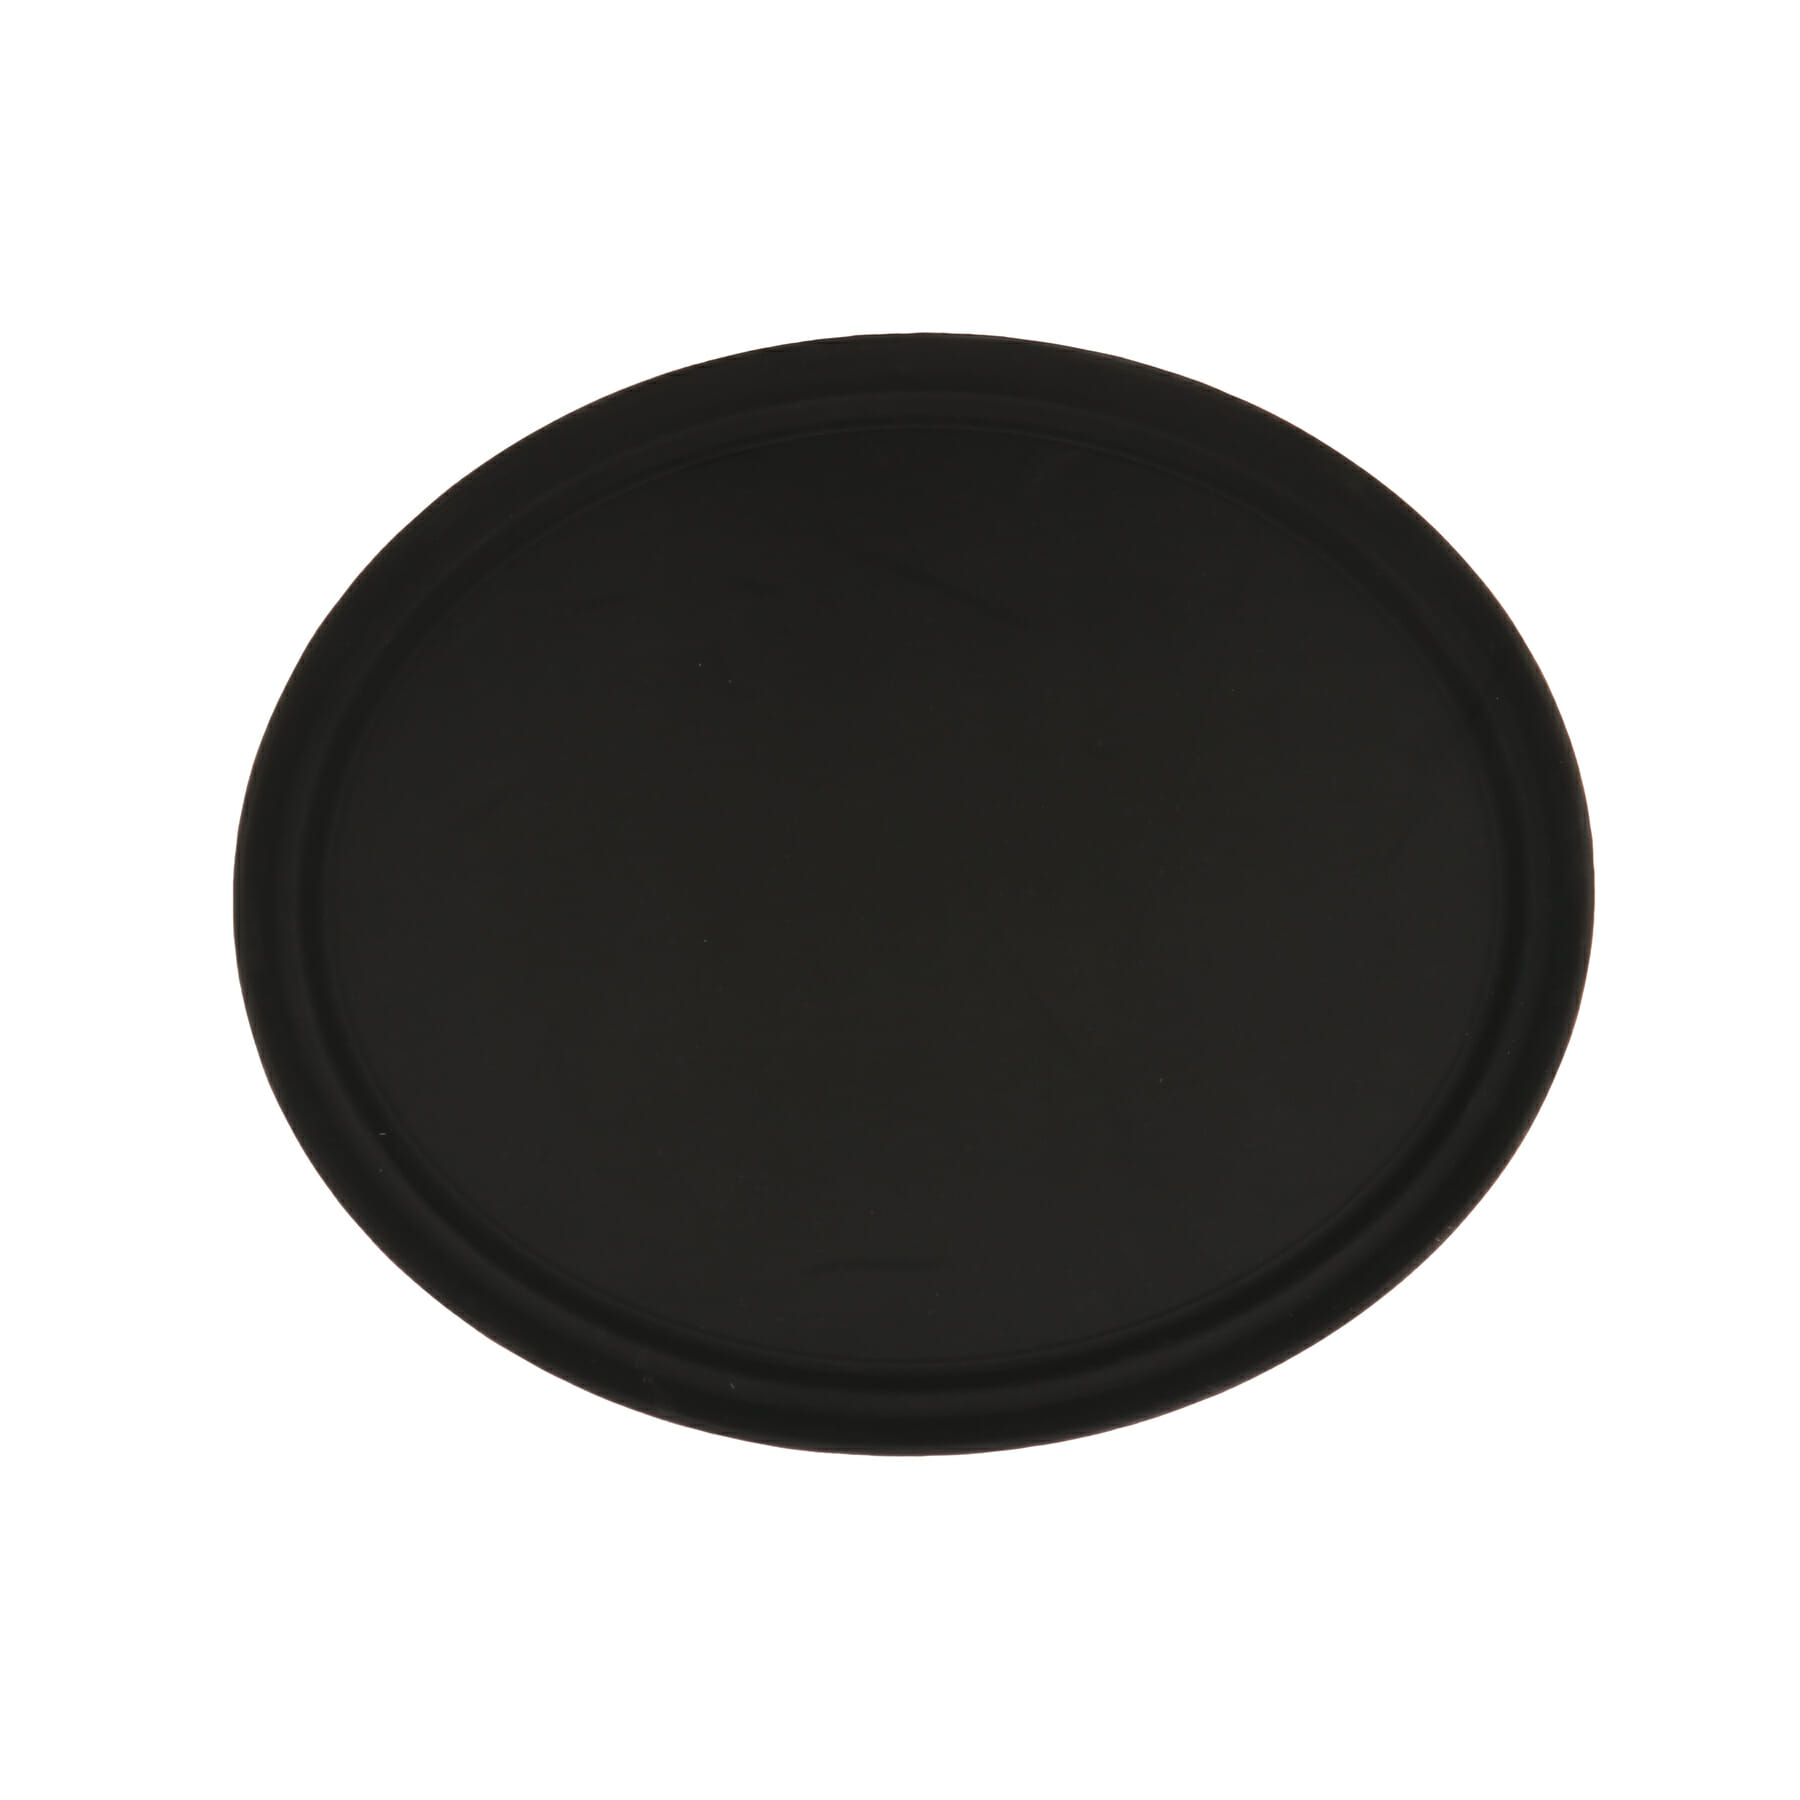 Choice 29 x 24 Black Oval Non-Skid Serving Tray